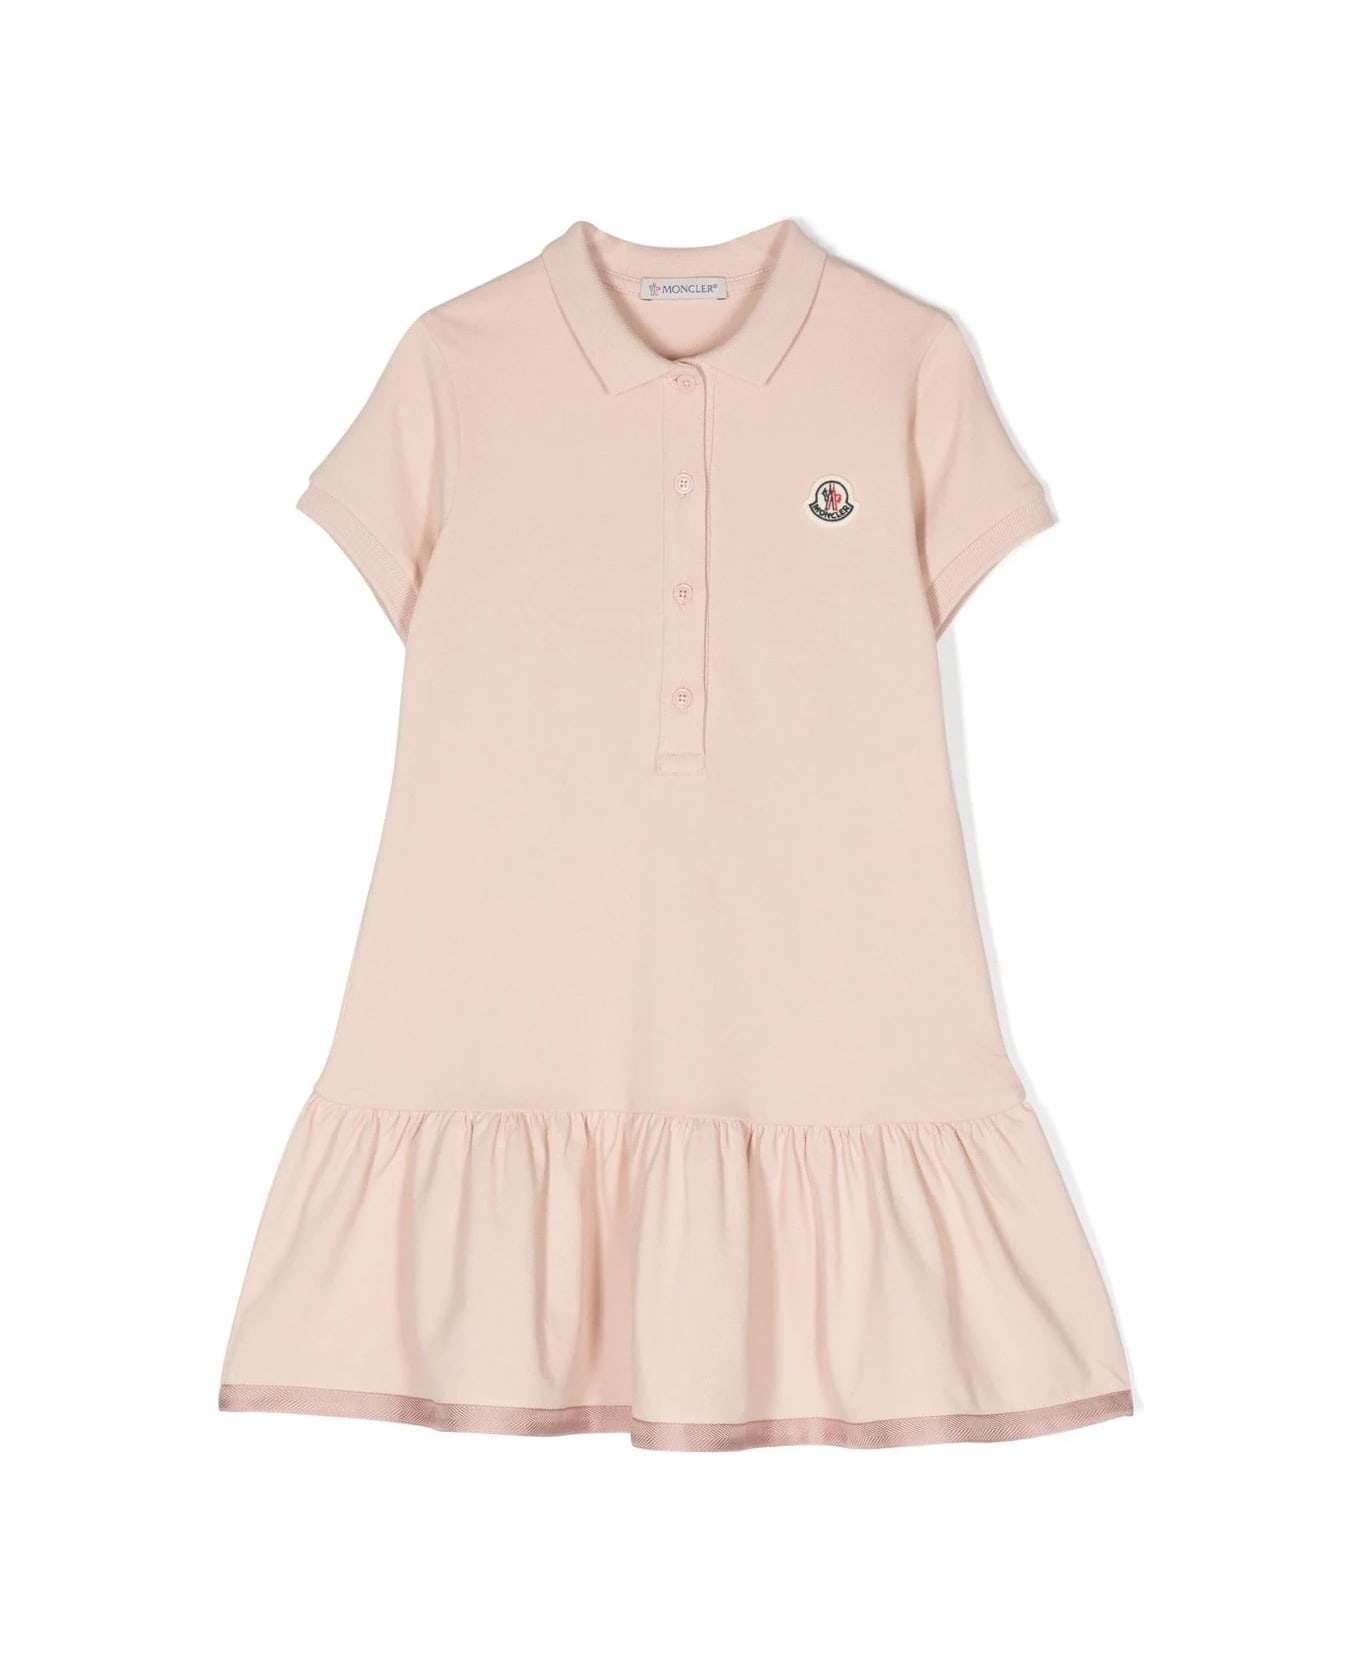 Moncler Pink Polo Style Dress With Logo Patch - Pink